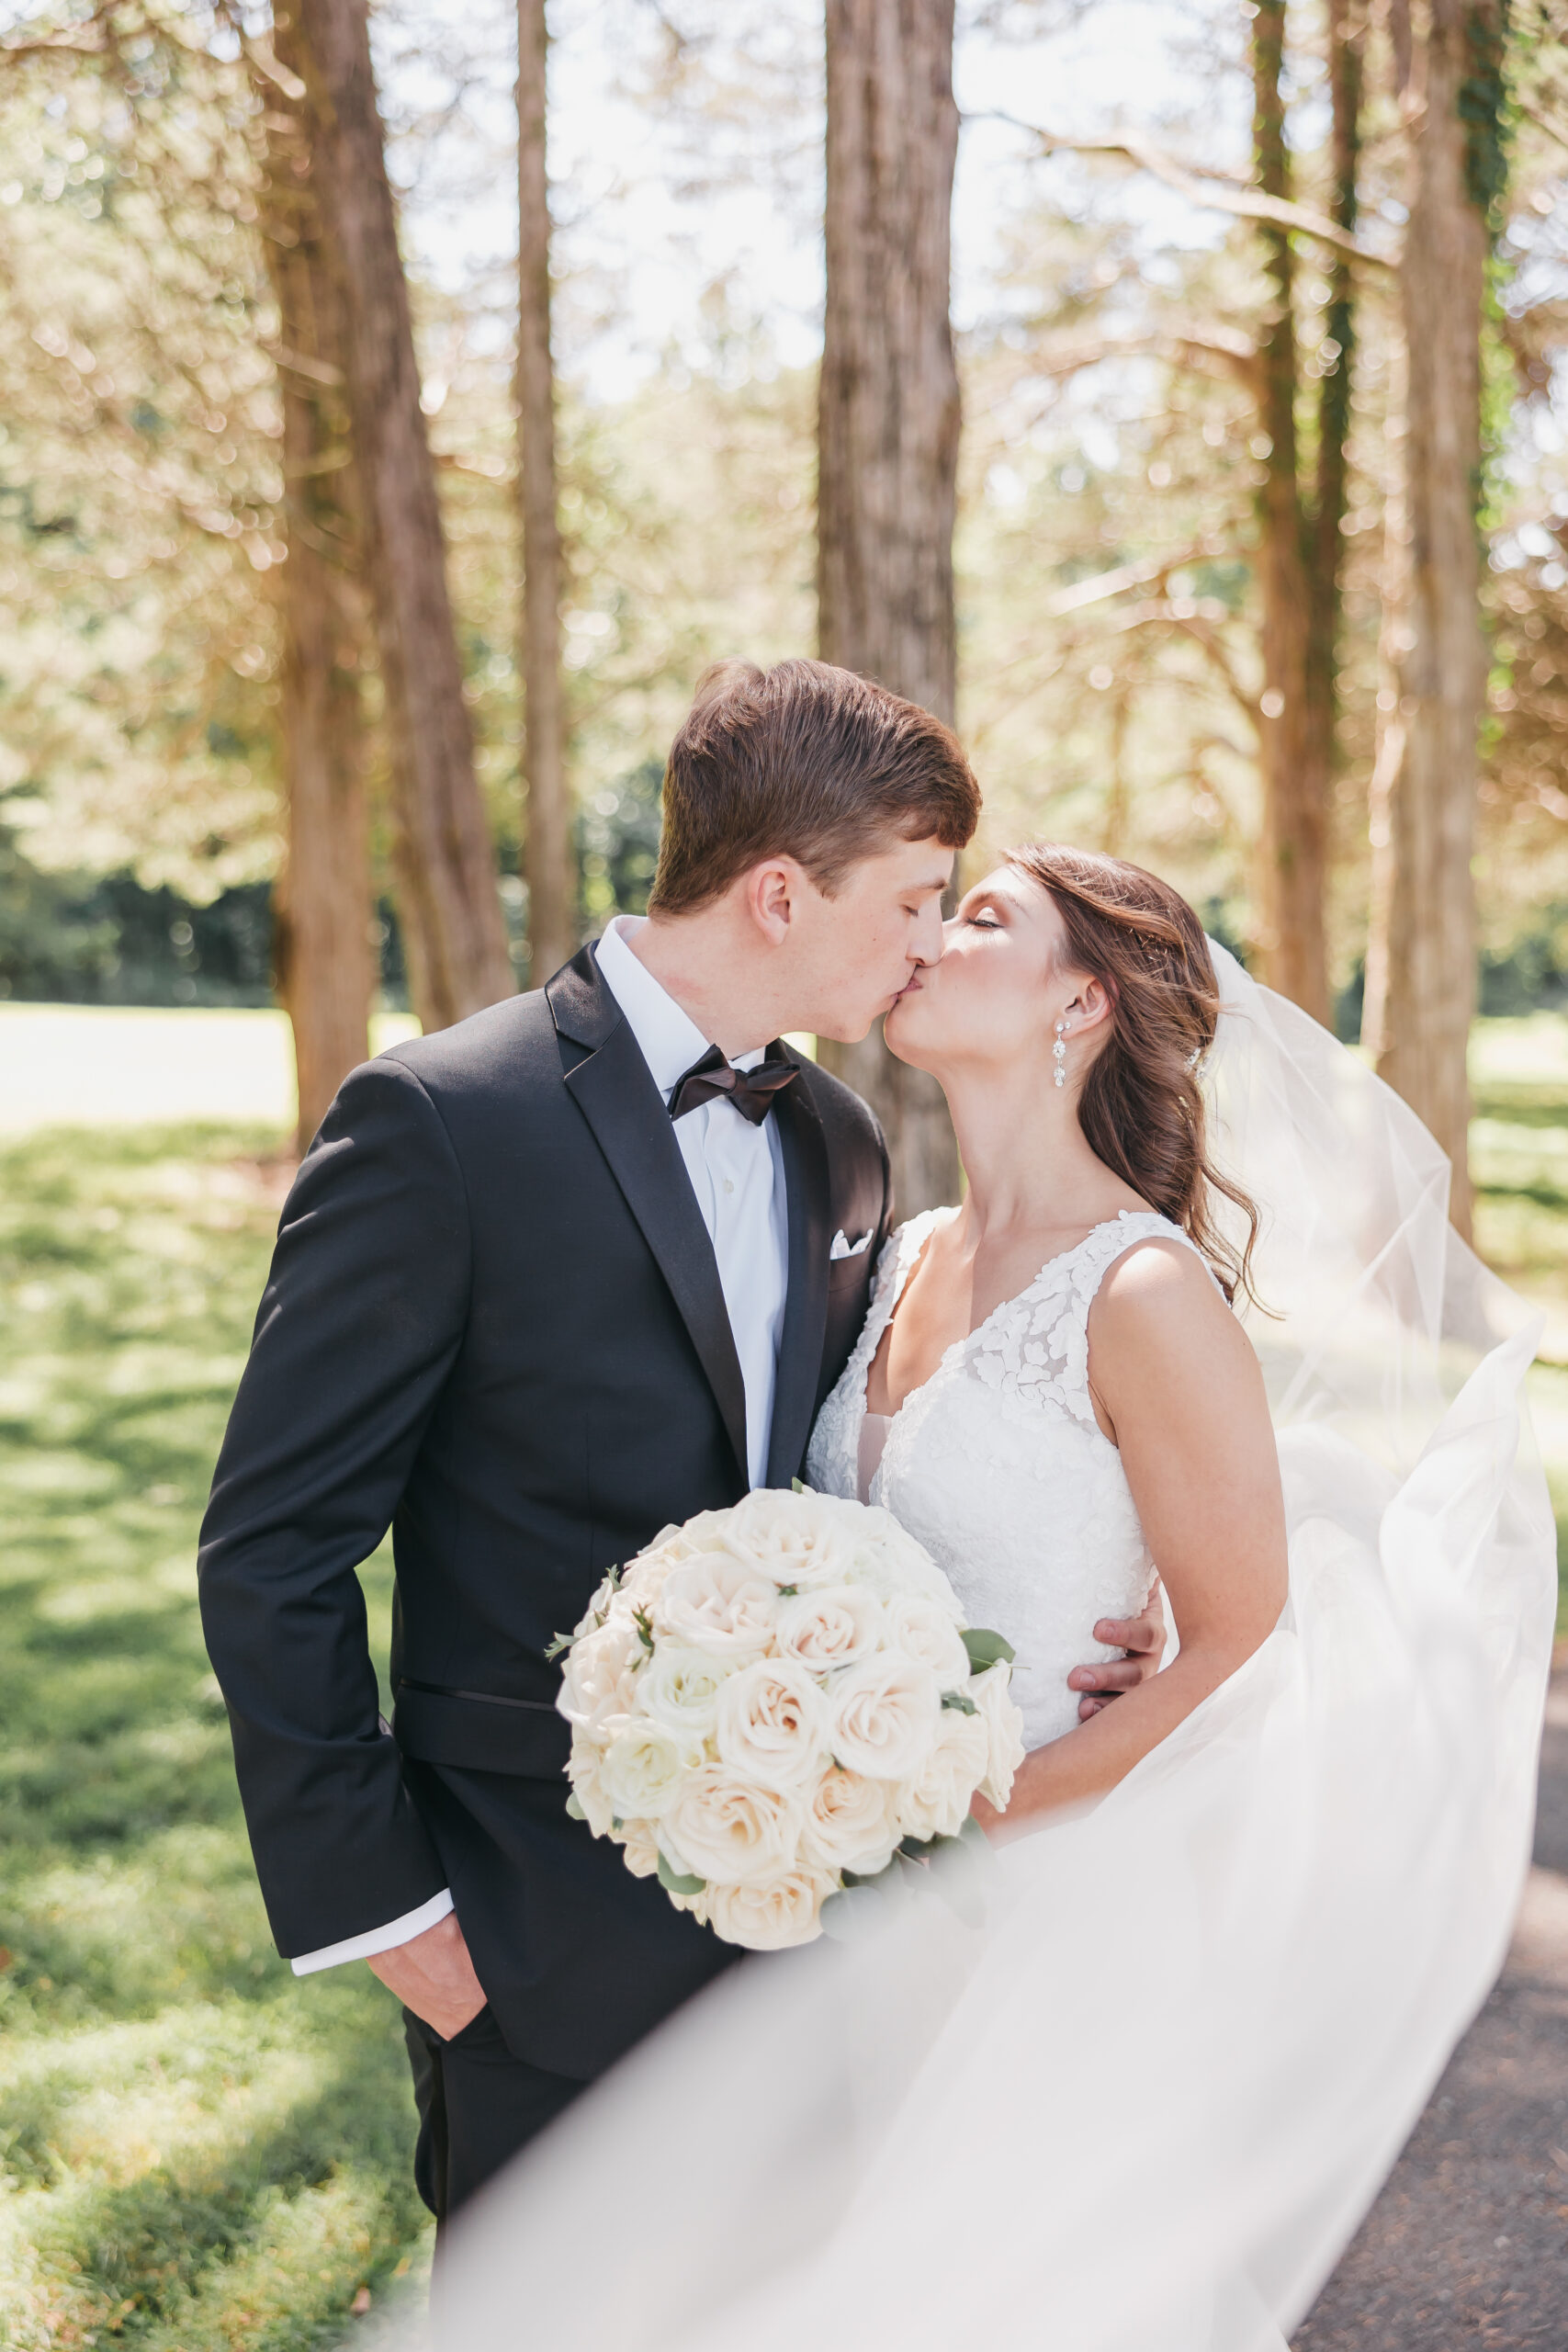 Bride and groom sharing a kiss during their wedding shoot, taken by Loudoun County wedding photographer Rachel Yearick